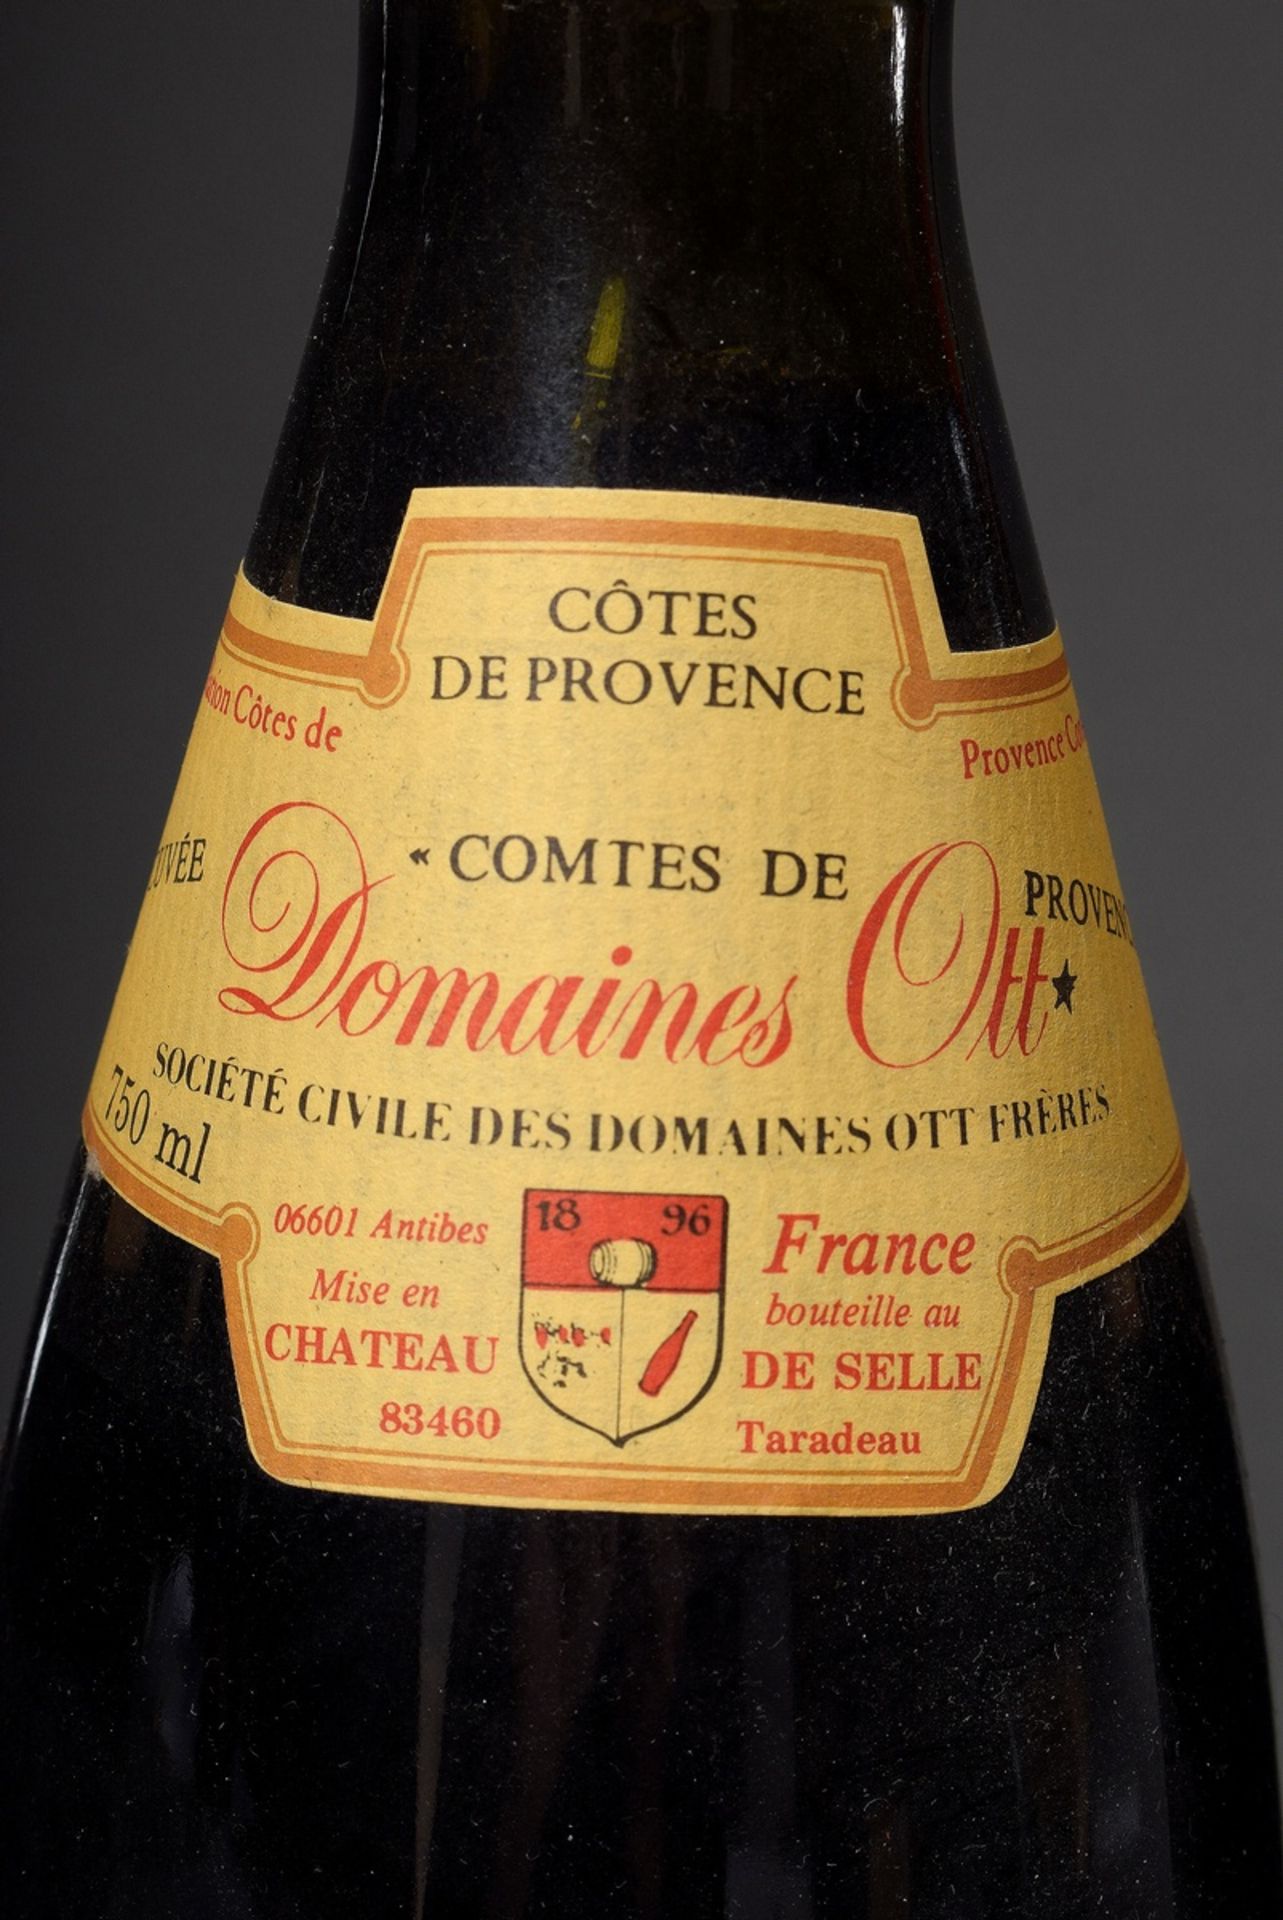 4 bottles 1985 red wine "Domaines Ott, Bandol", Provence, top shoulder, 0,75l, contains sulfites - Image 2 of 4